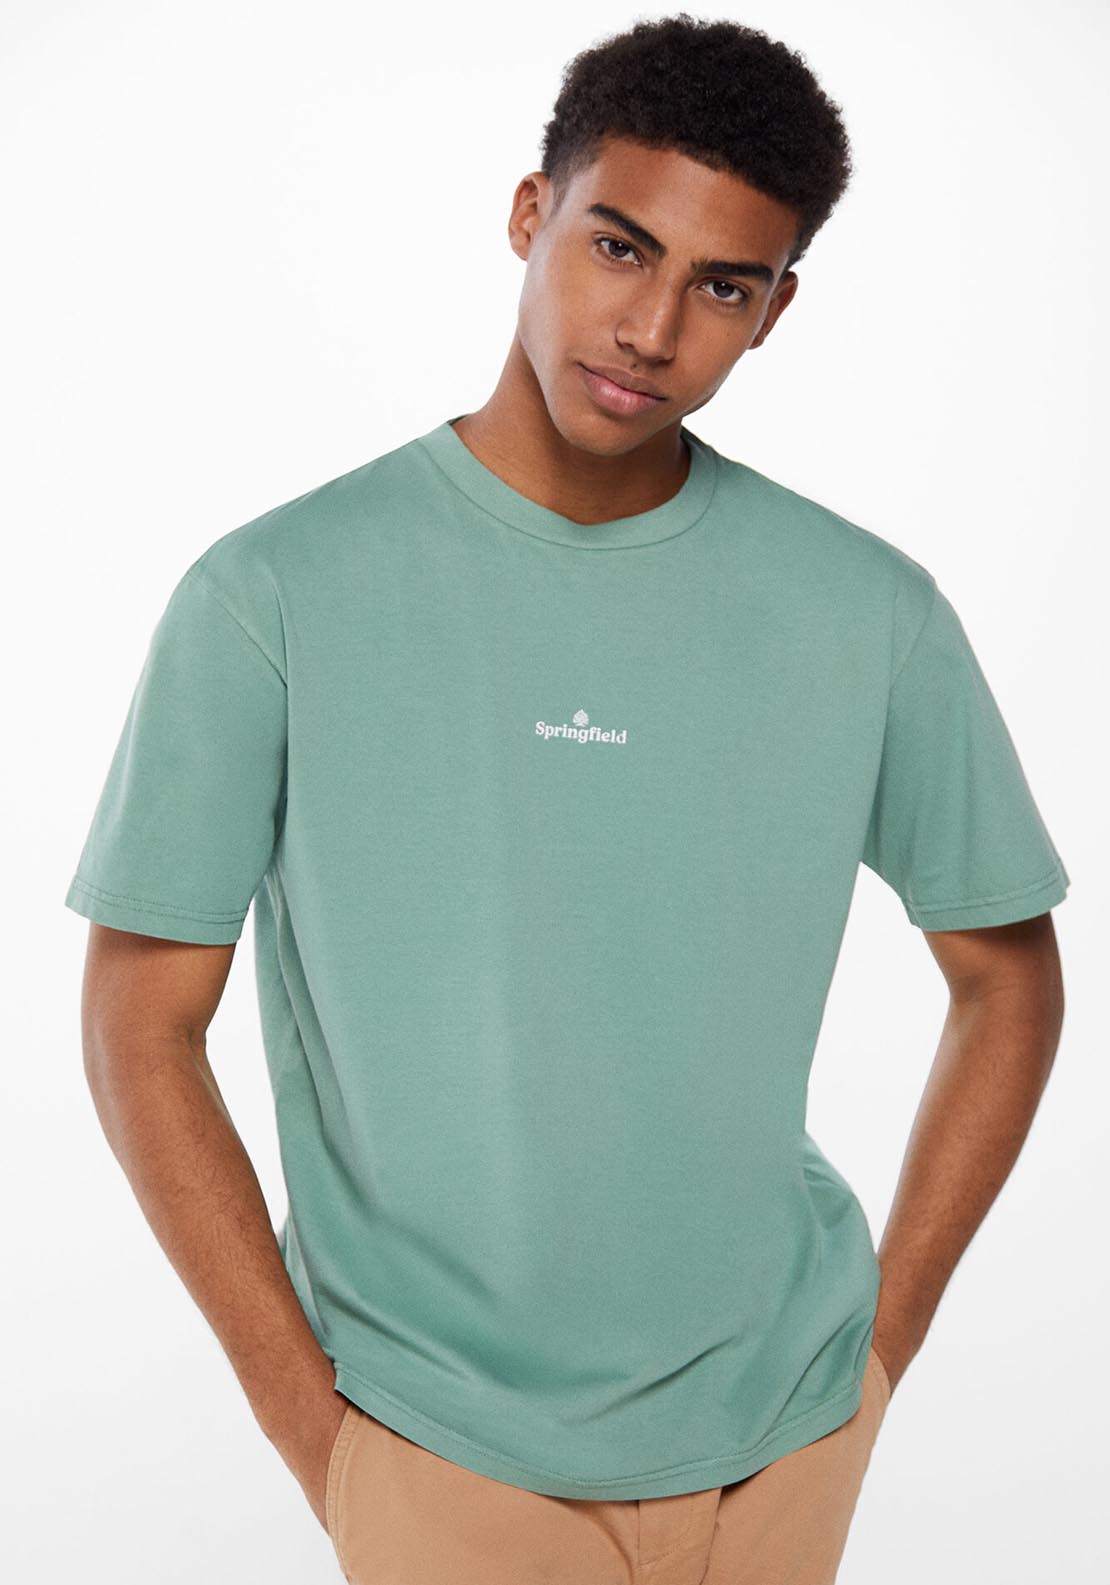 Springfield Washed T-shirt with logo - Green 1 Shaws Department Stores